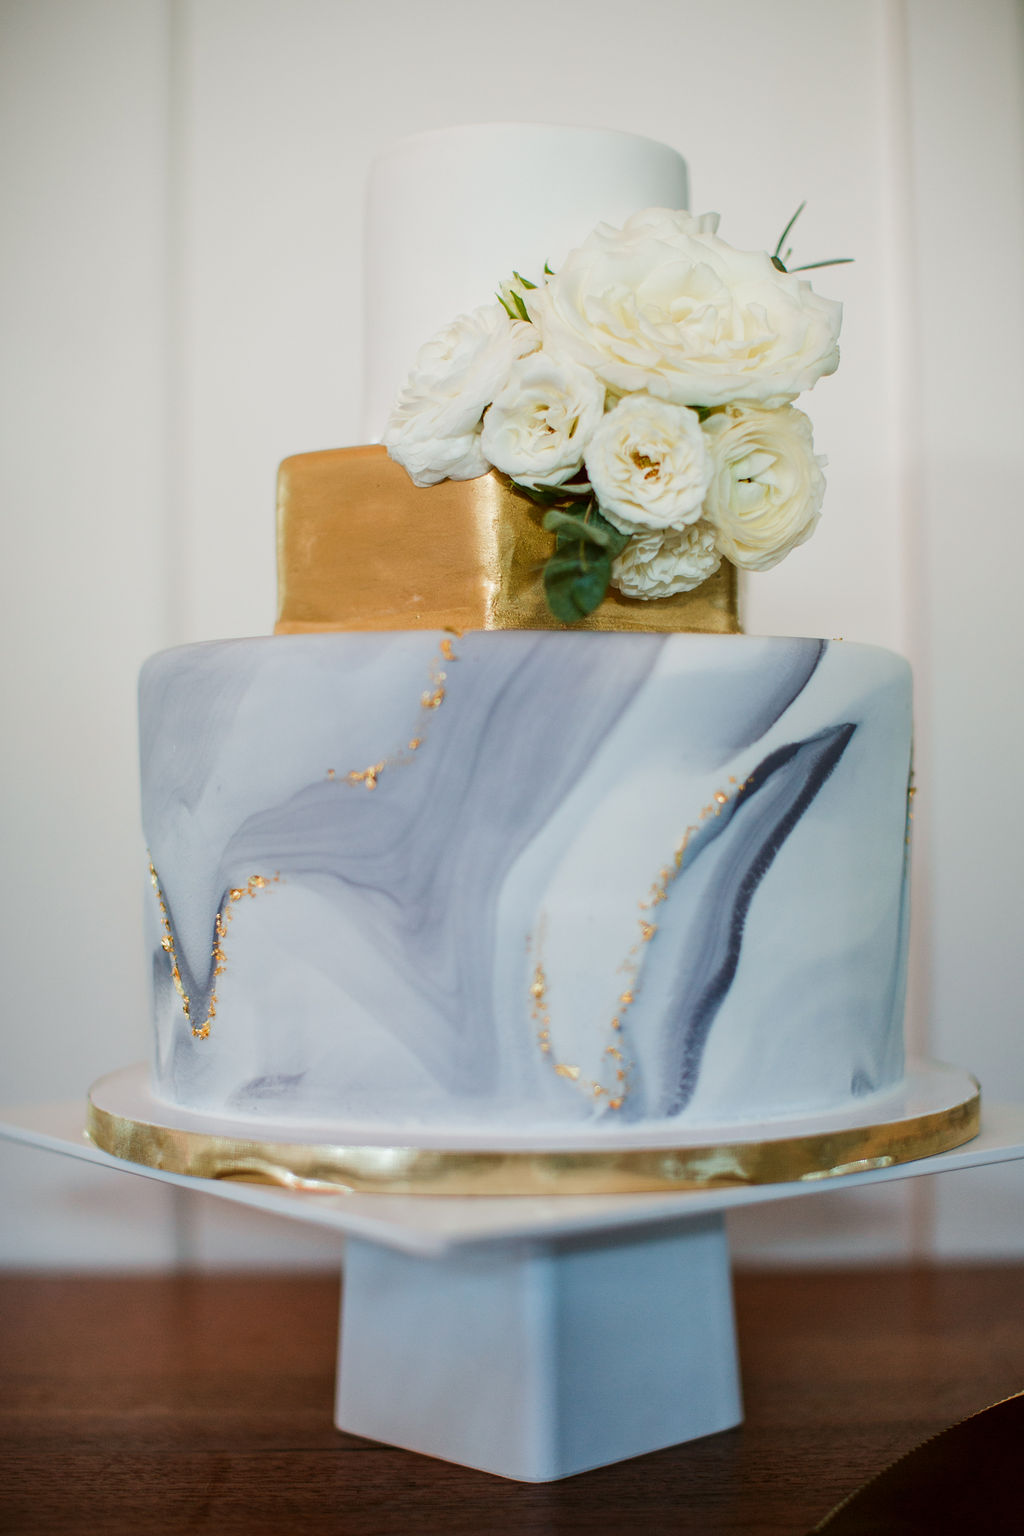 Marbled cake with all white flowers and touches of greenery